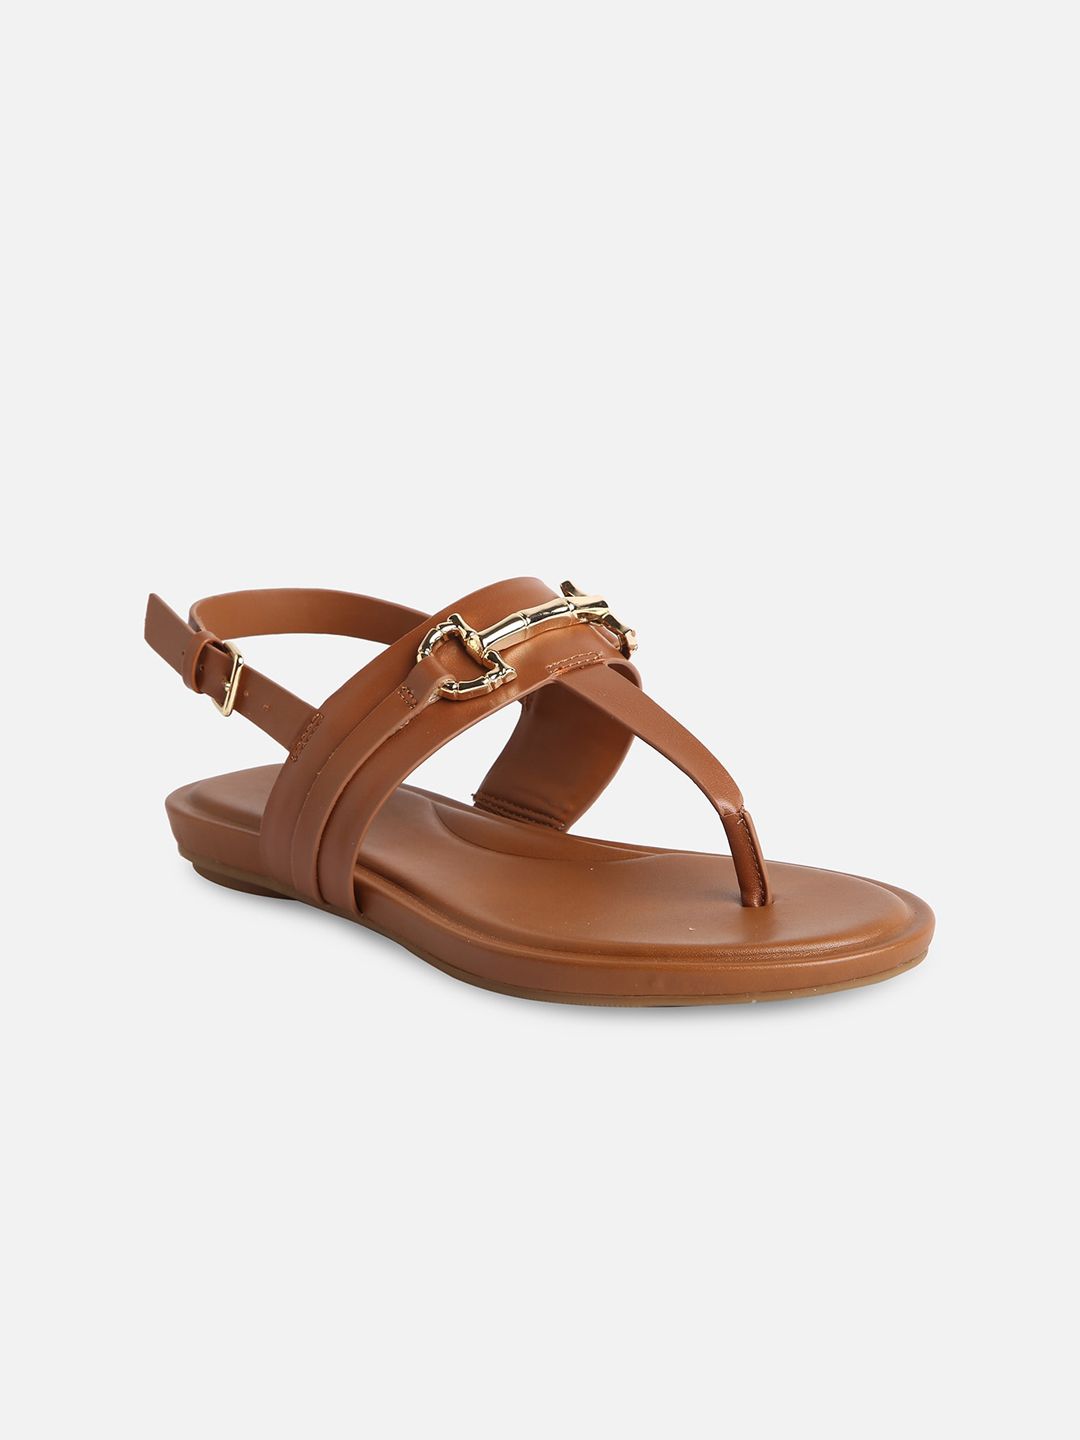 ALDO Women Embellished T-Strap Flats Price in India